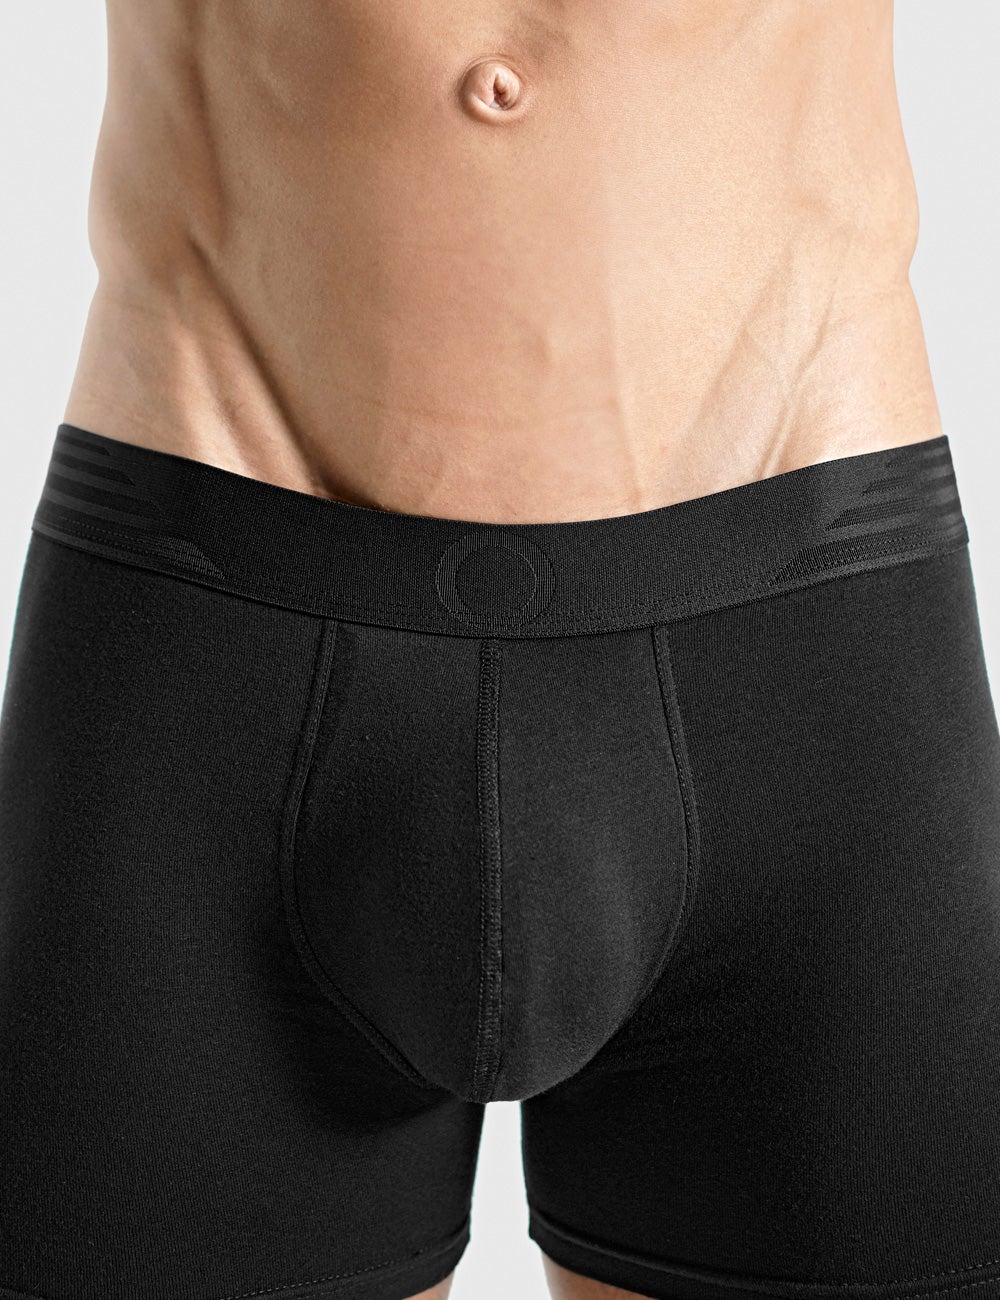 Padded Boxer Brief + Smart Package Cup – Rounderbum Canada